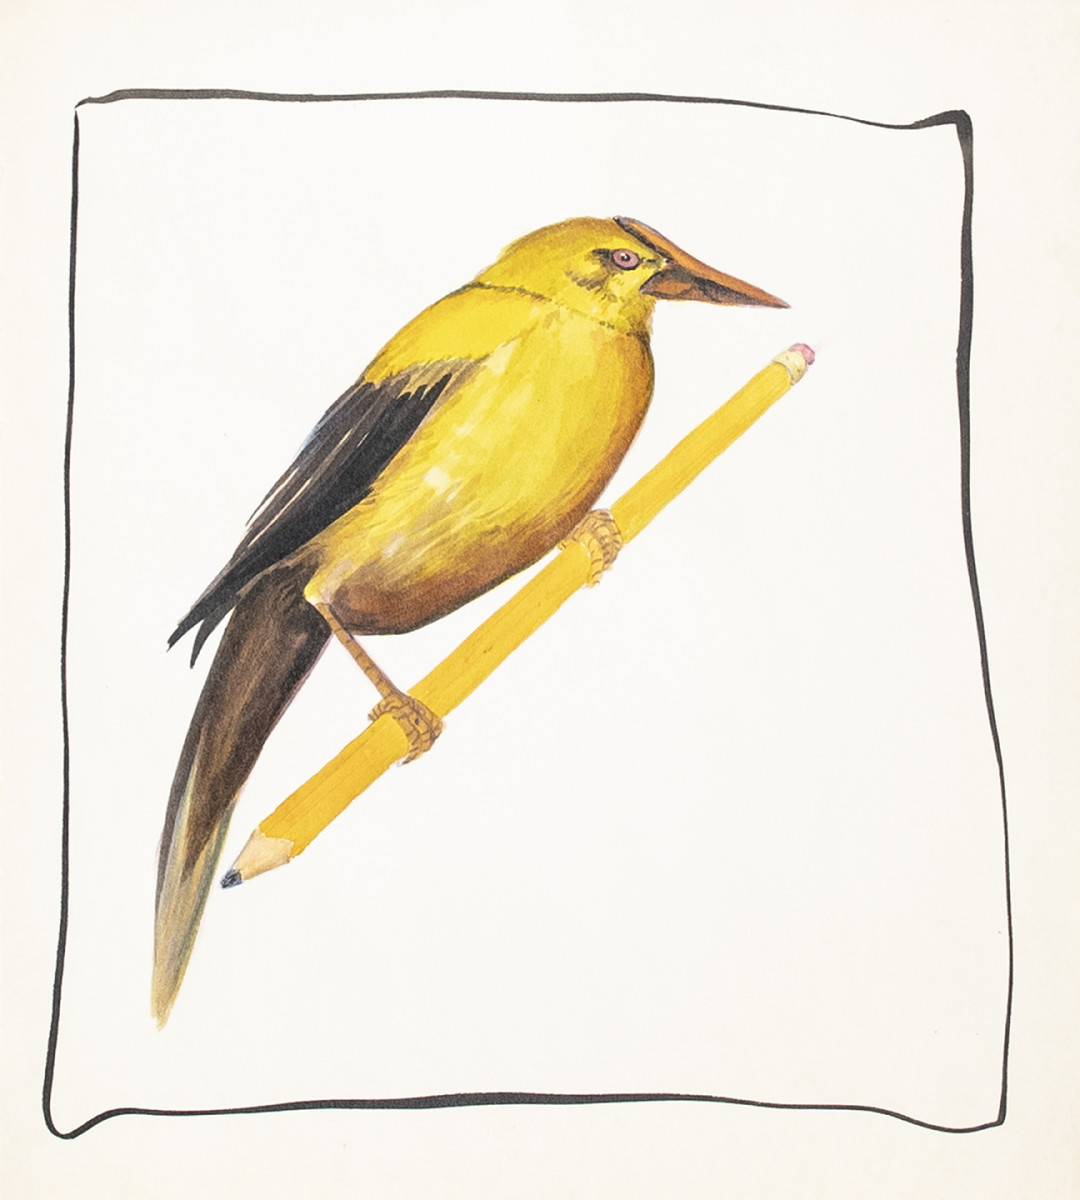 Untitled (Yellow Bird on Pencil by Diana Roy 1940-2019  Image: This delicate bird is one of the few remaining early works of art by Diana Roy (1940 - 2019) a Modern Canadian Artistic Treasure.  